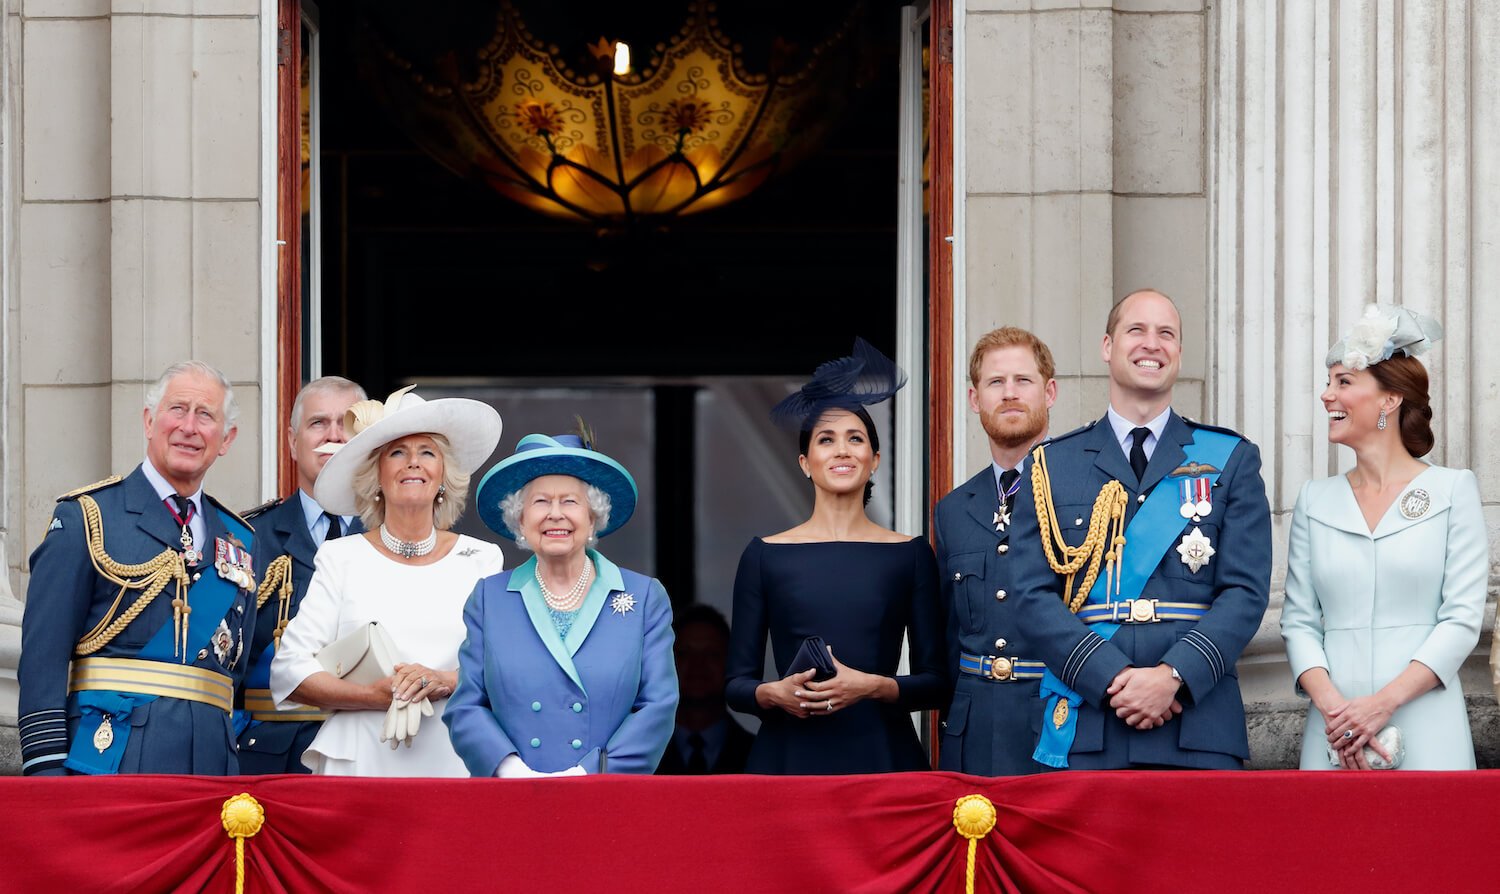 Prince Harry and Meghan Markle stand with members of the royal family on the balcony of Buckingham Palace